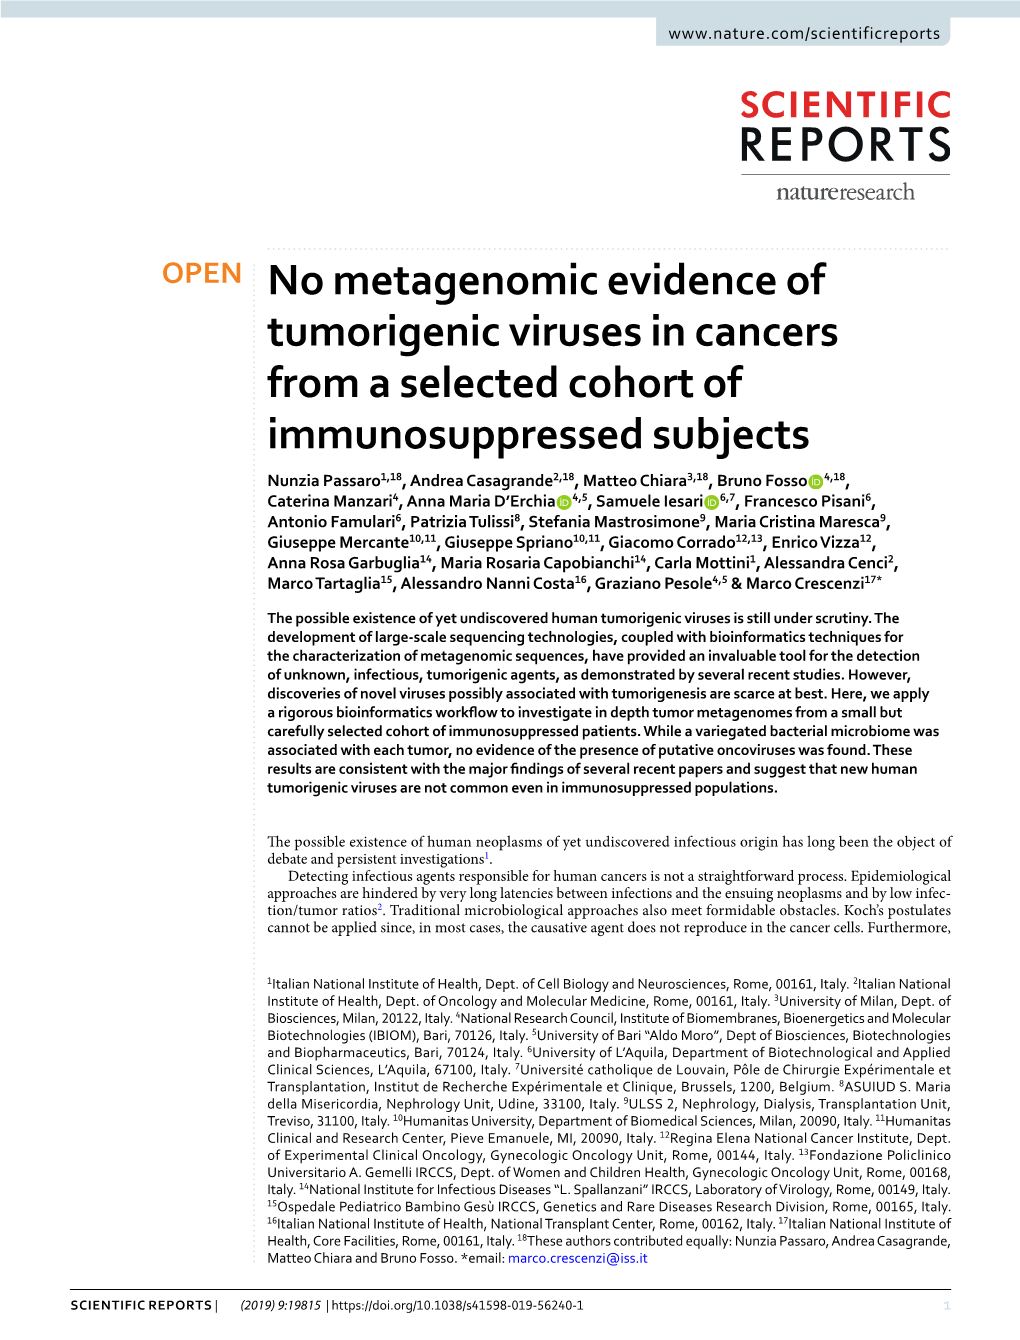 No Metagenomic Evidence of Tumorigenic Viruses in Cancers from a Selected Cohort of Immunosuppressed Subjects